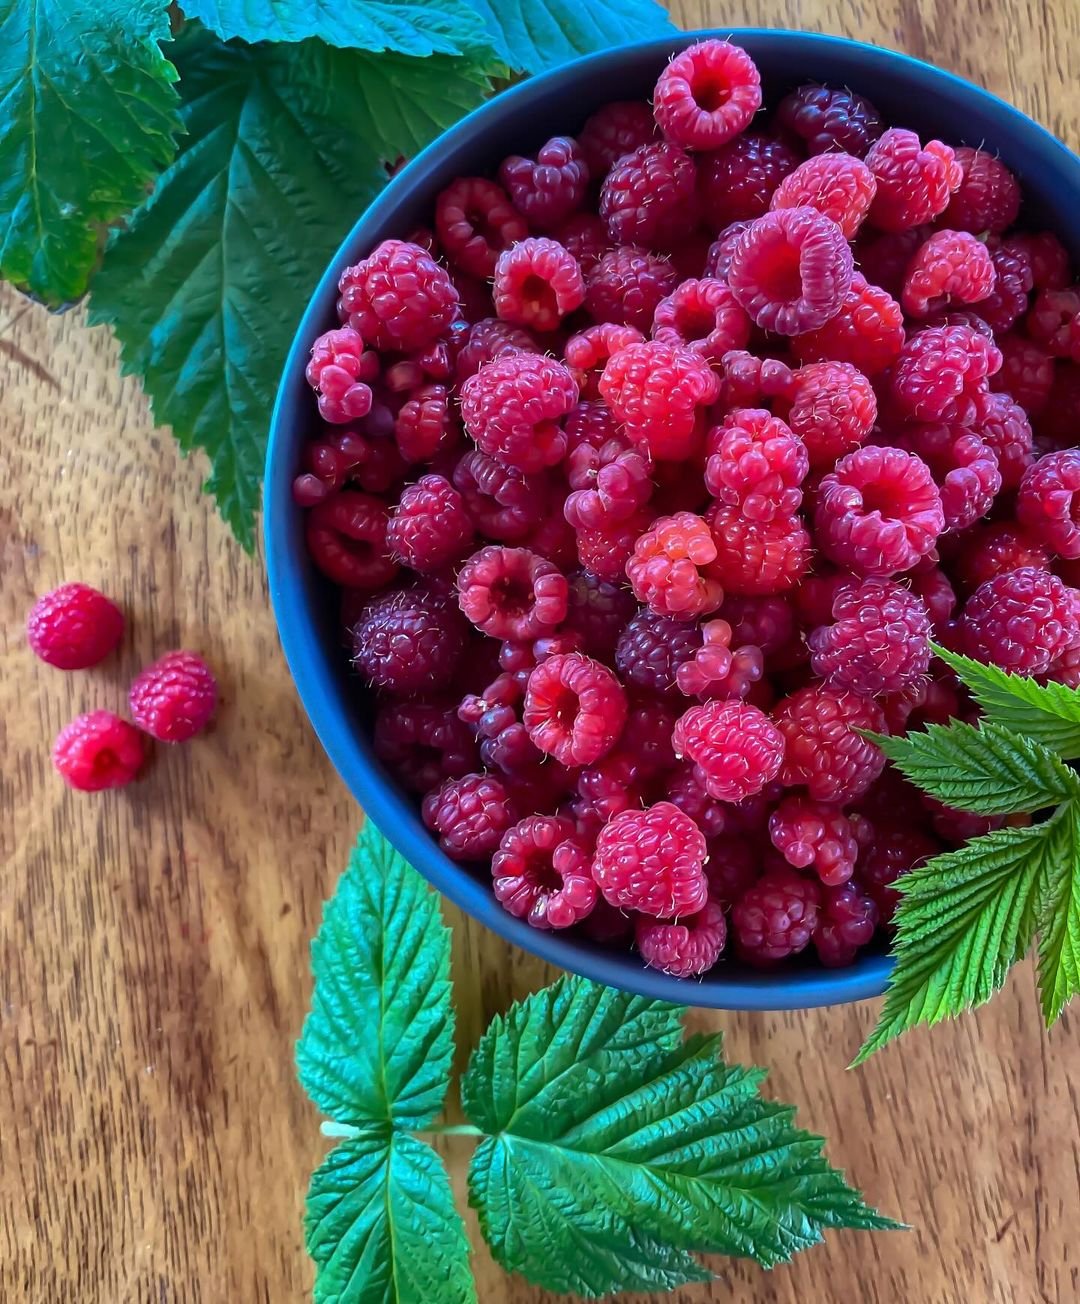  How to Grow Raspberries at Home: A Complete Beginner's Guide